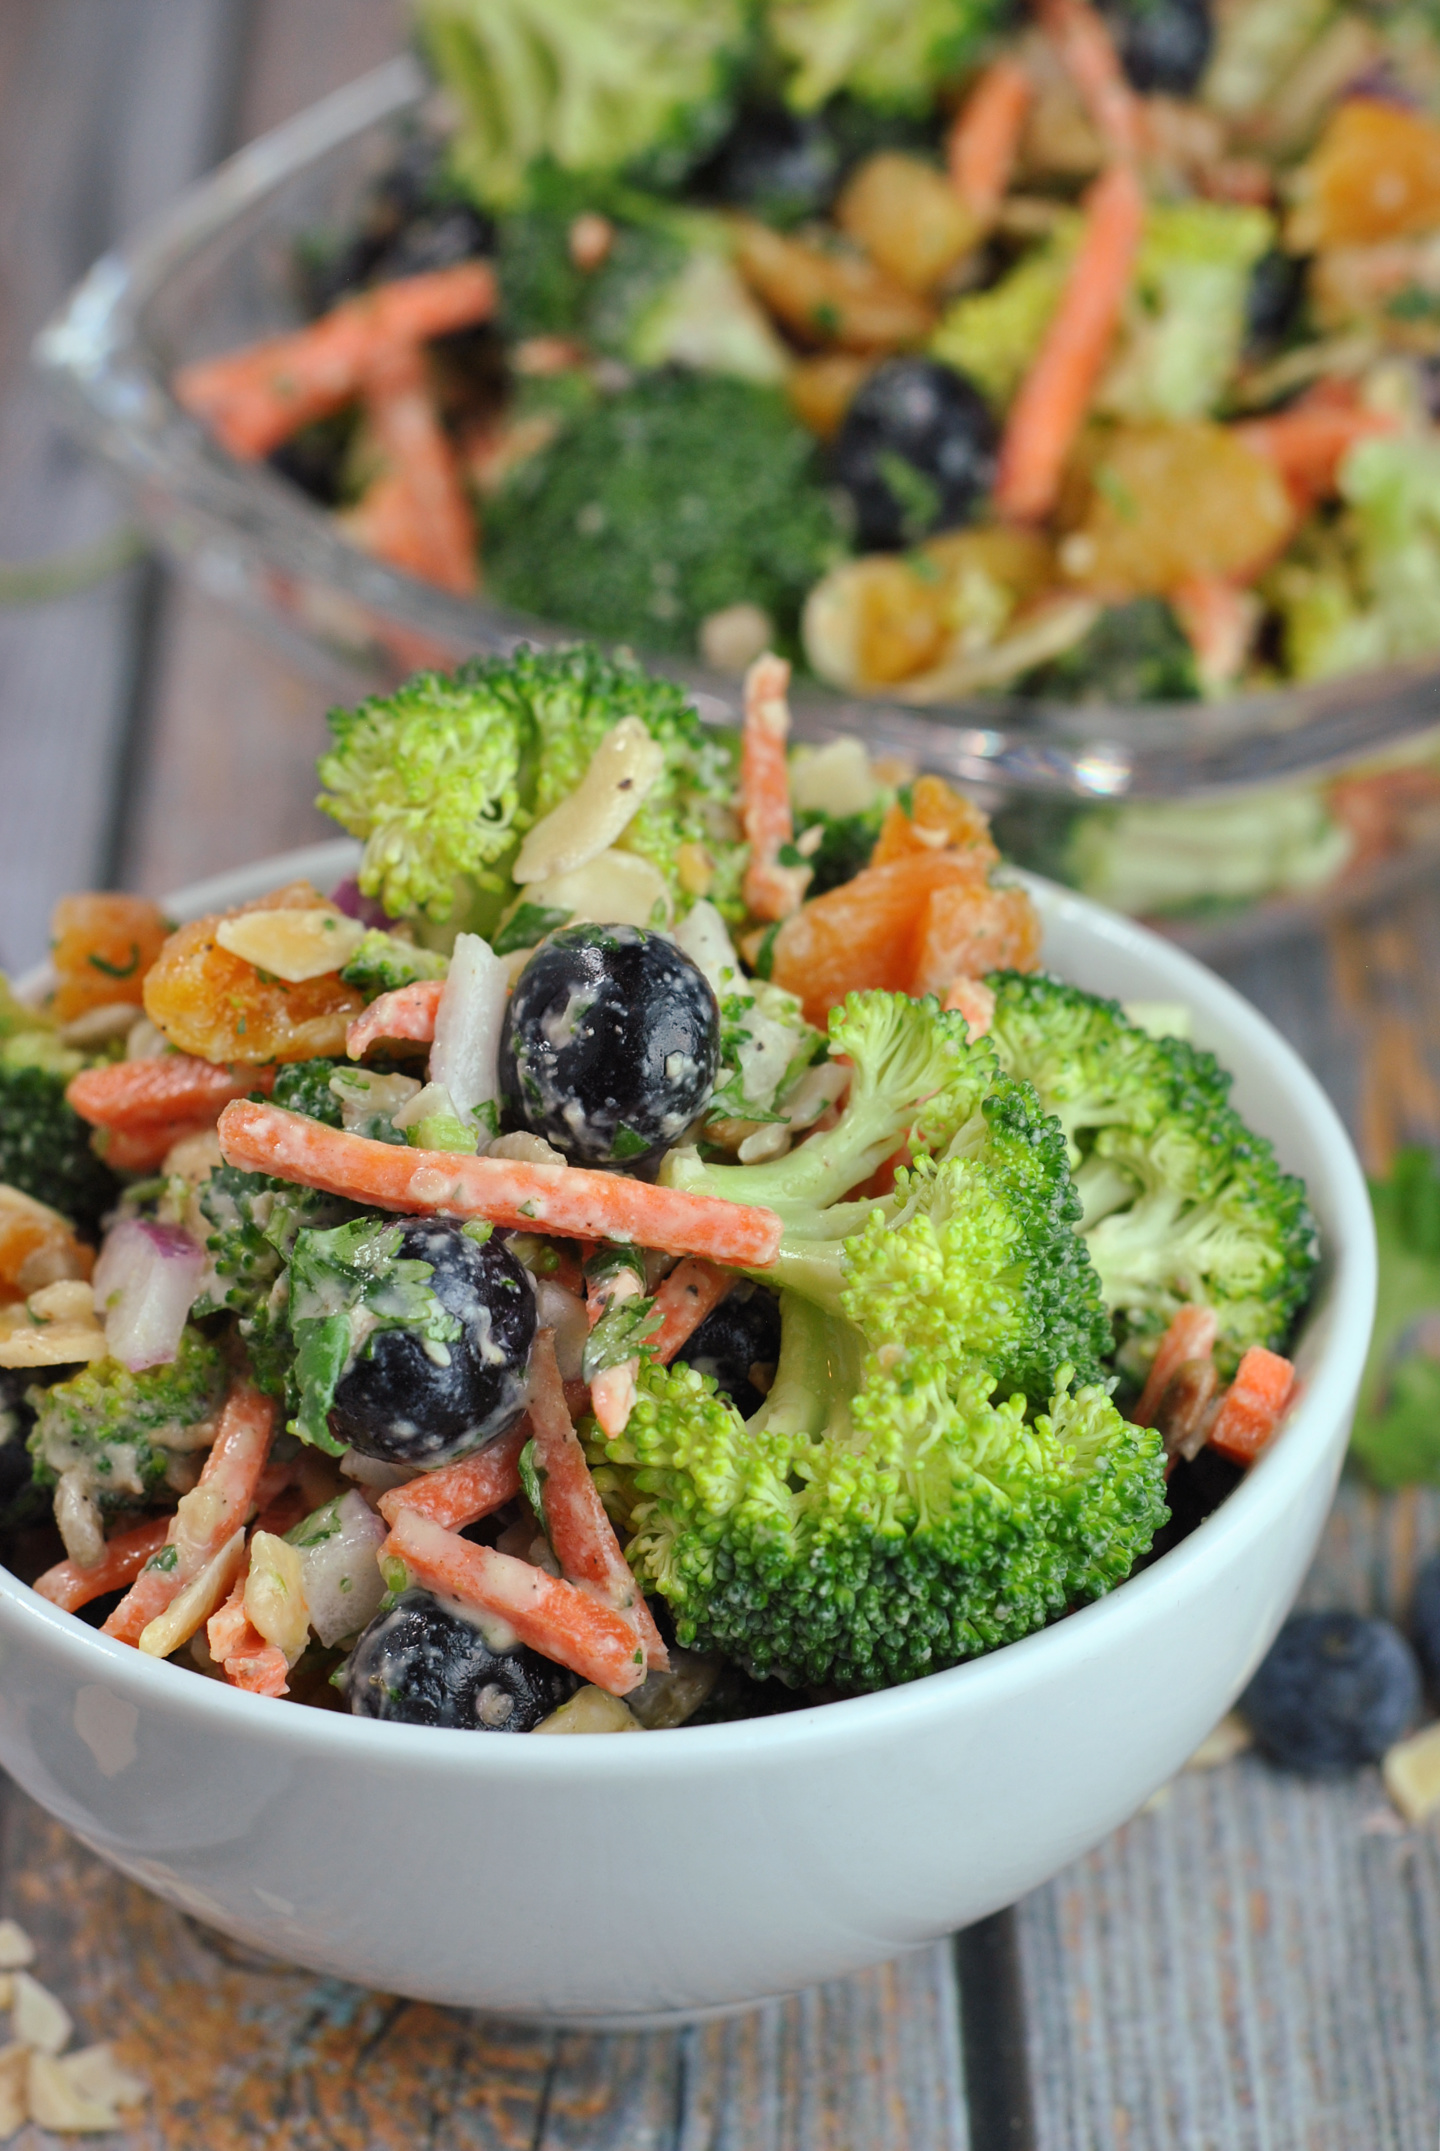 Superfood Broccoli and Blueberry Protein Salad via @preventionrd